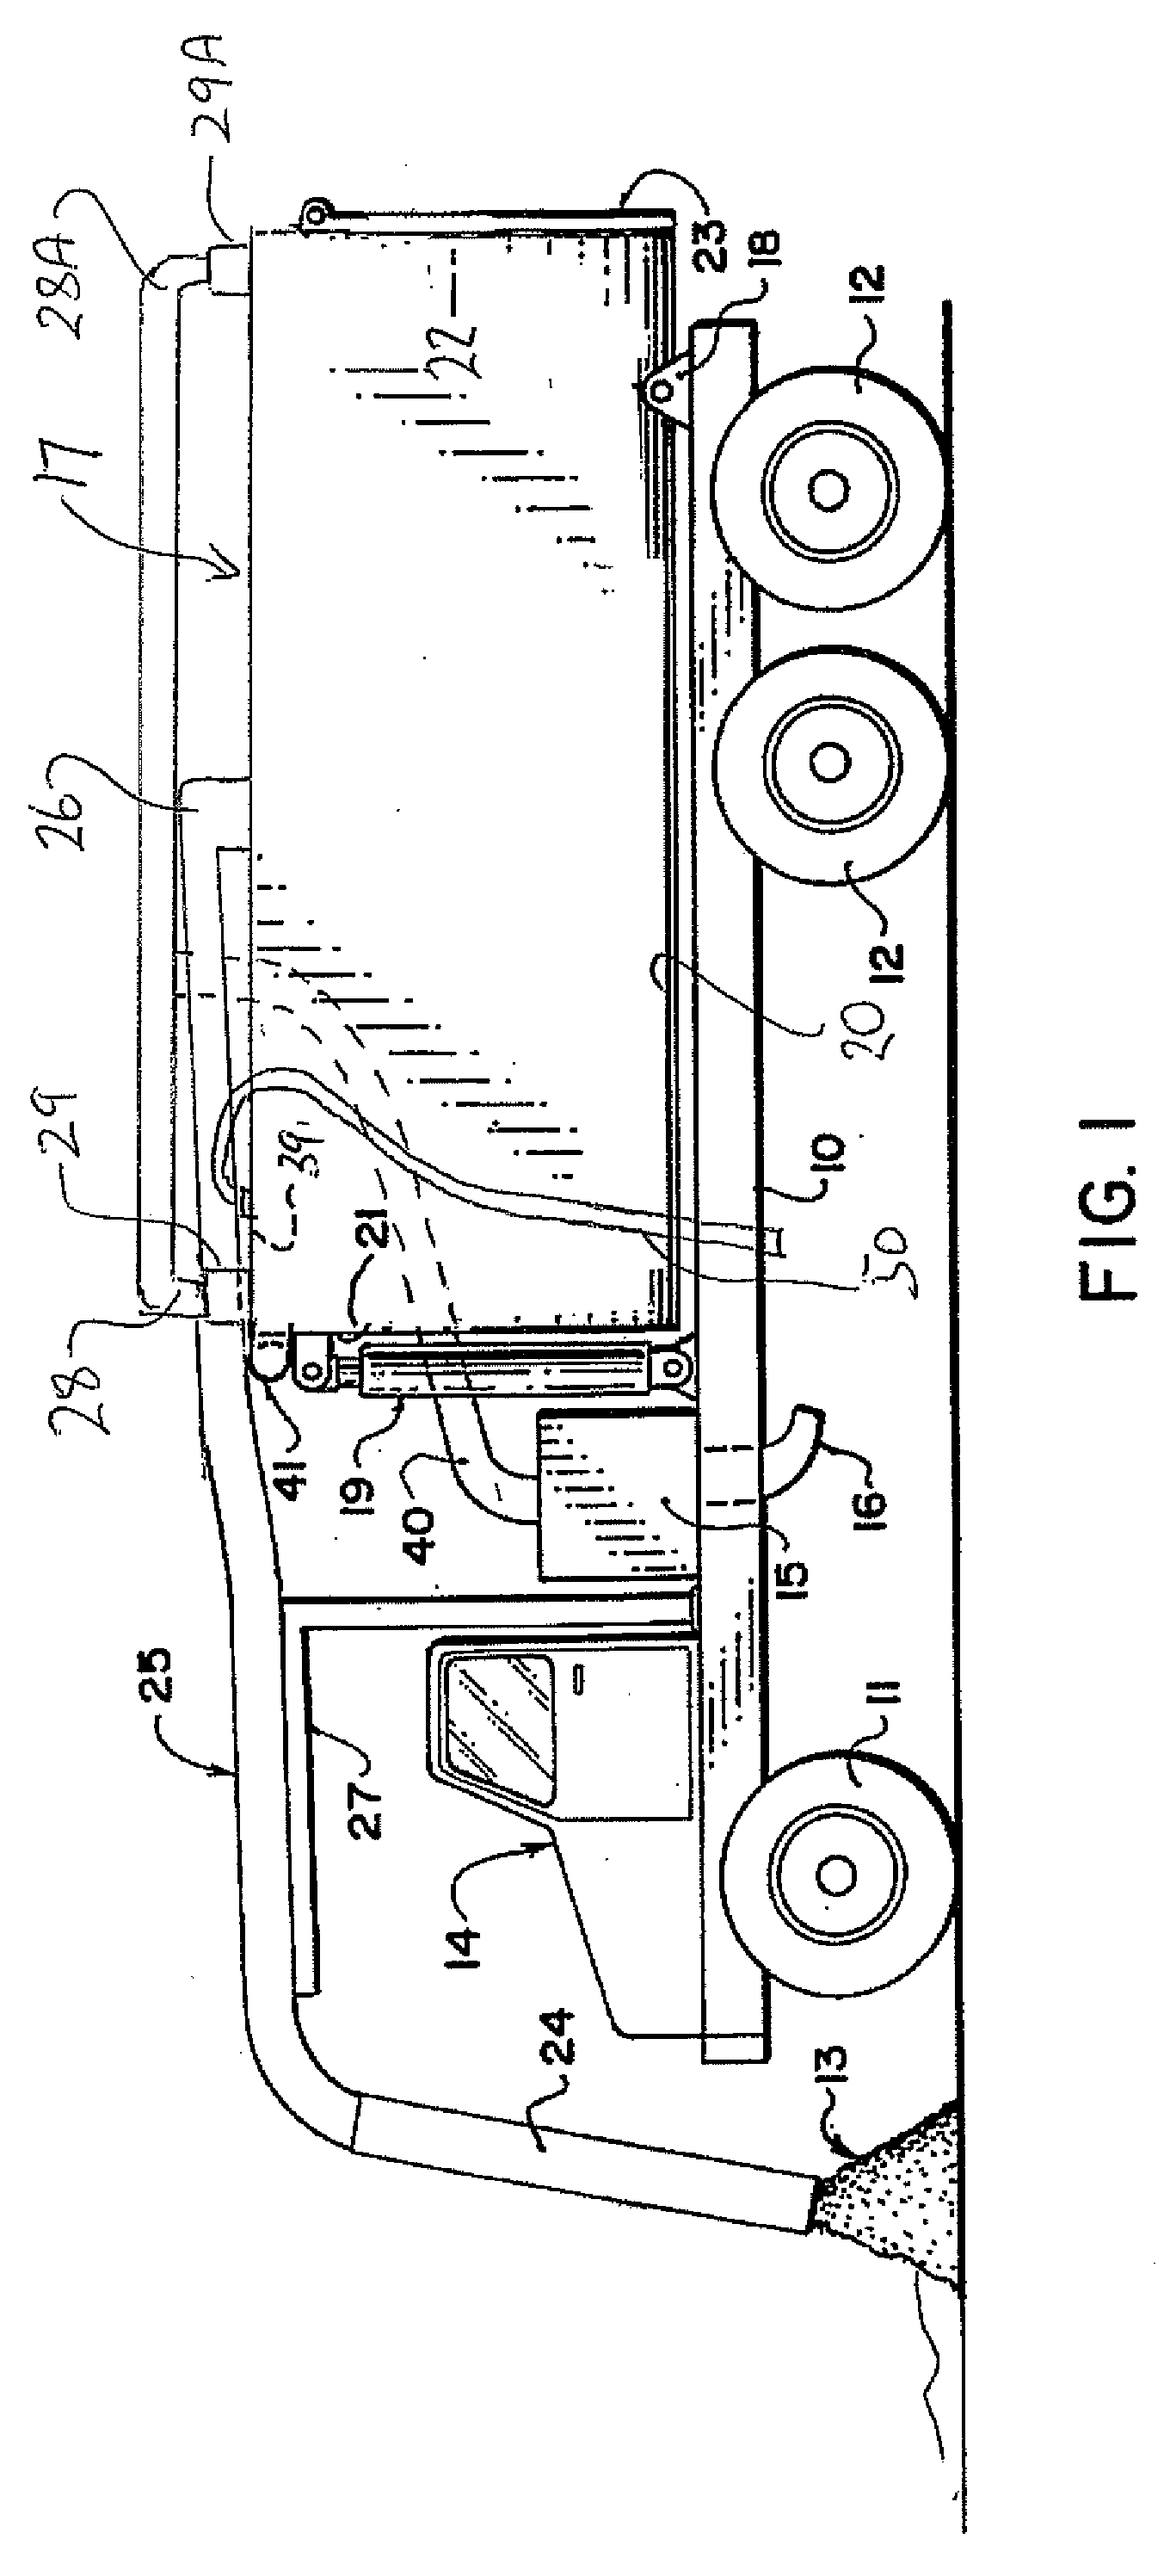 Material separation system for vacuum truck